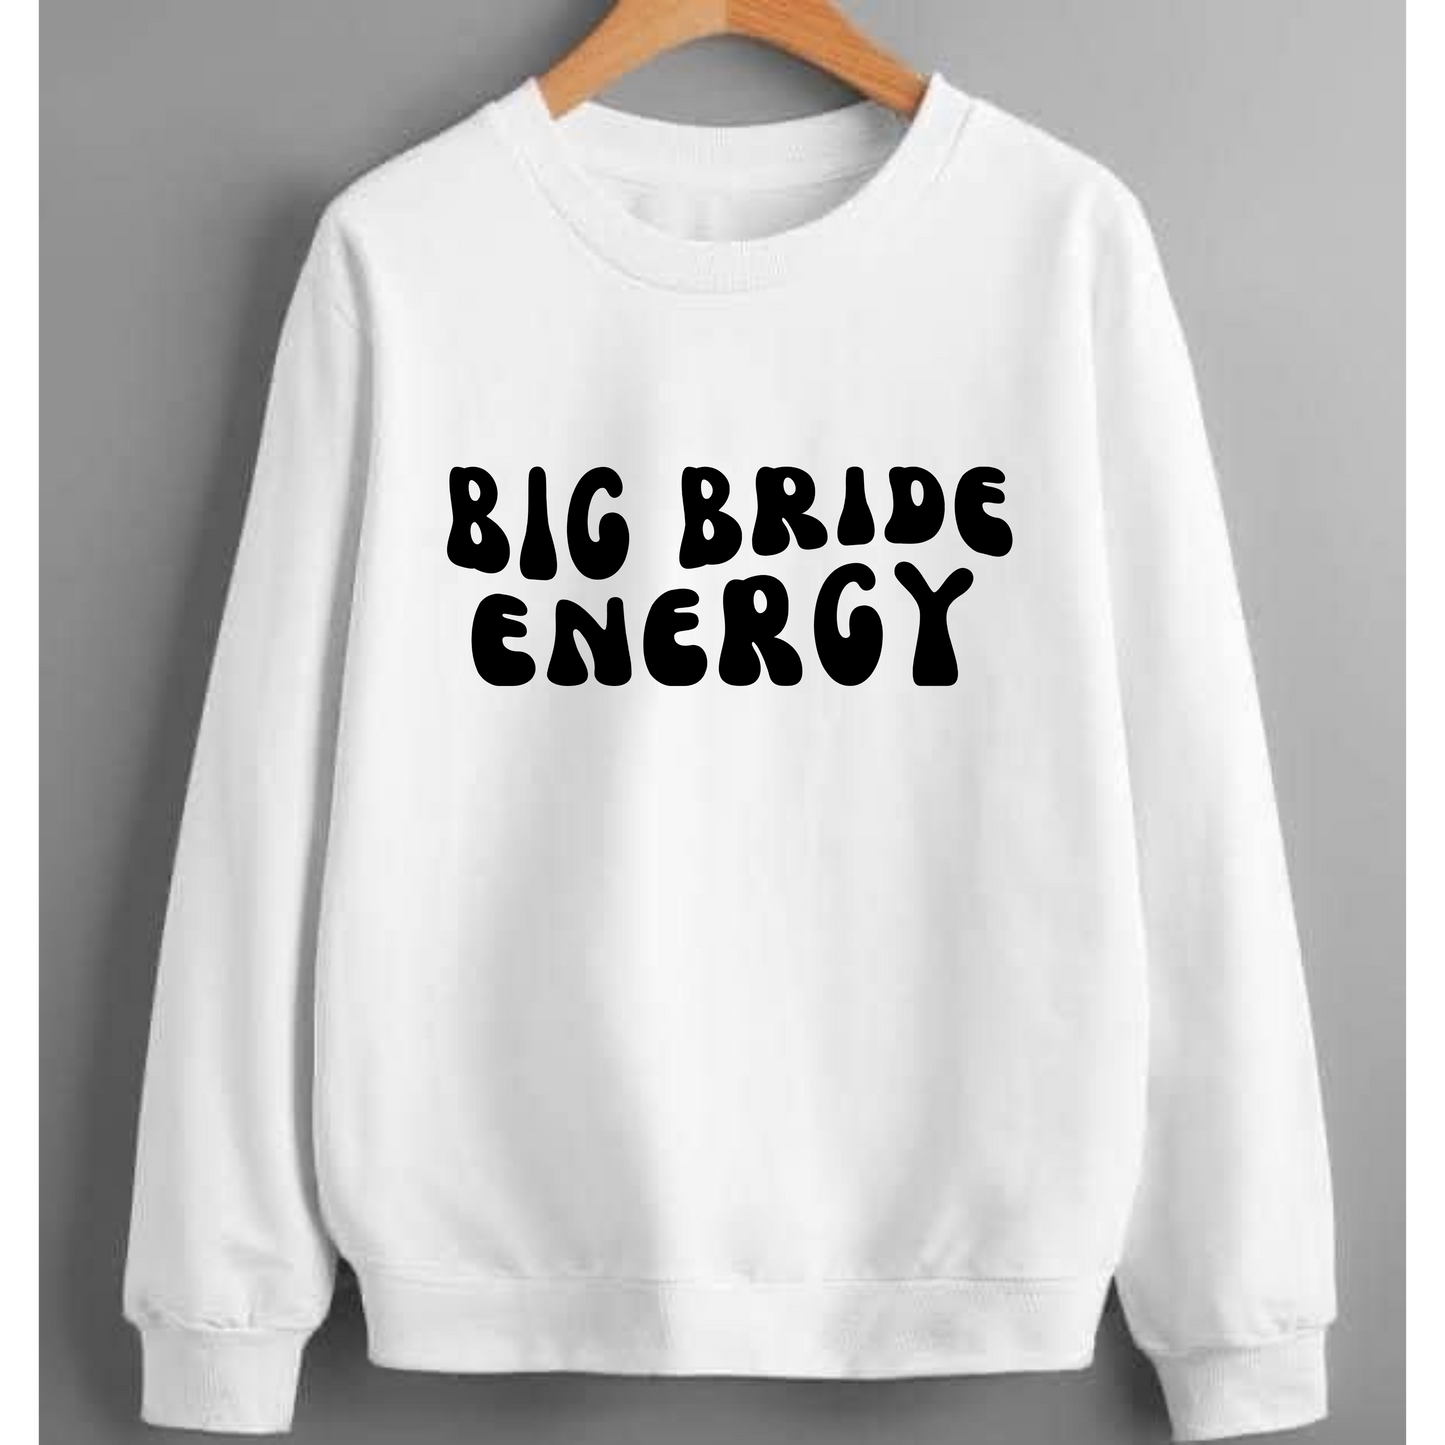 Big Bride Energy, who doesn't love it! Perfect for the Bride to be leading up to your big day! This sweatshirt is soft and comfortable, perfect for casual wear. Made from 50/50 cotton, poly blend, this crewneck sweatshirt is sure to keep you warm and cozy all year long. You can wear it with anything you want to make a fashion statement.  Pick up one of these awesome crewneck sweatshirts today and show off your inner big bride energy!